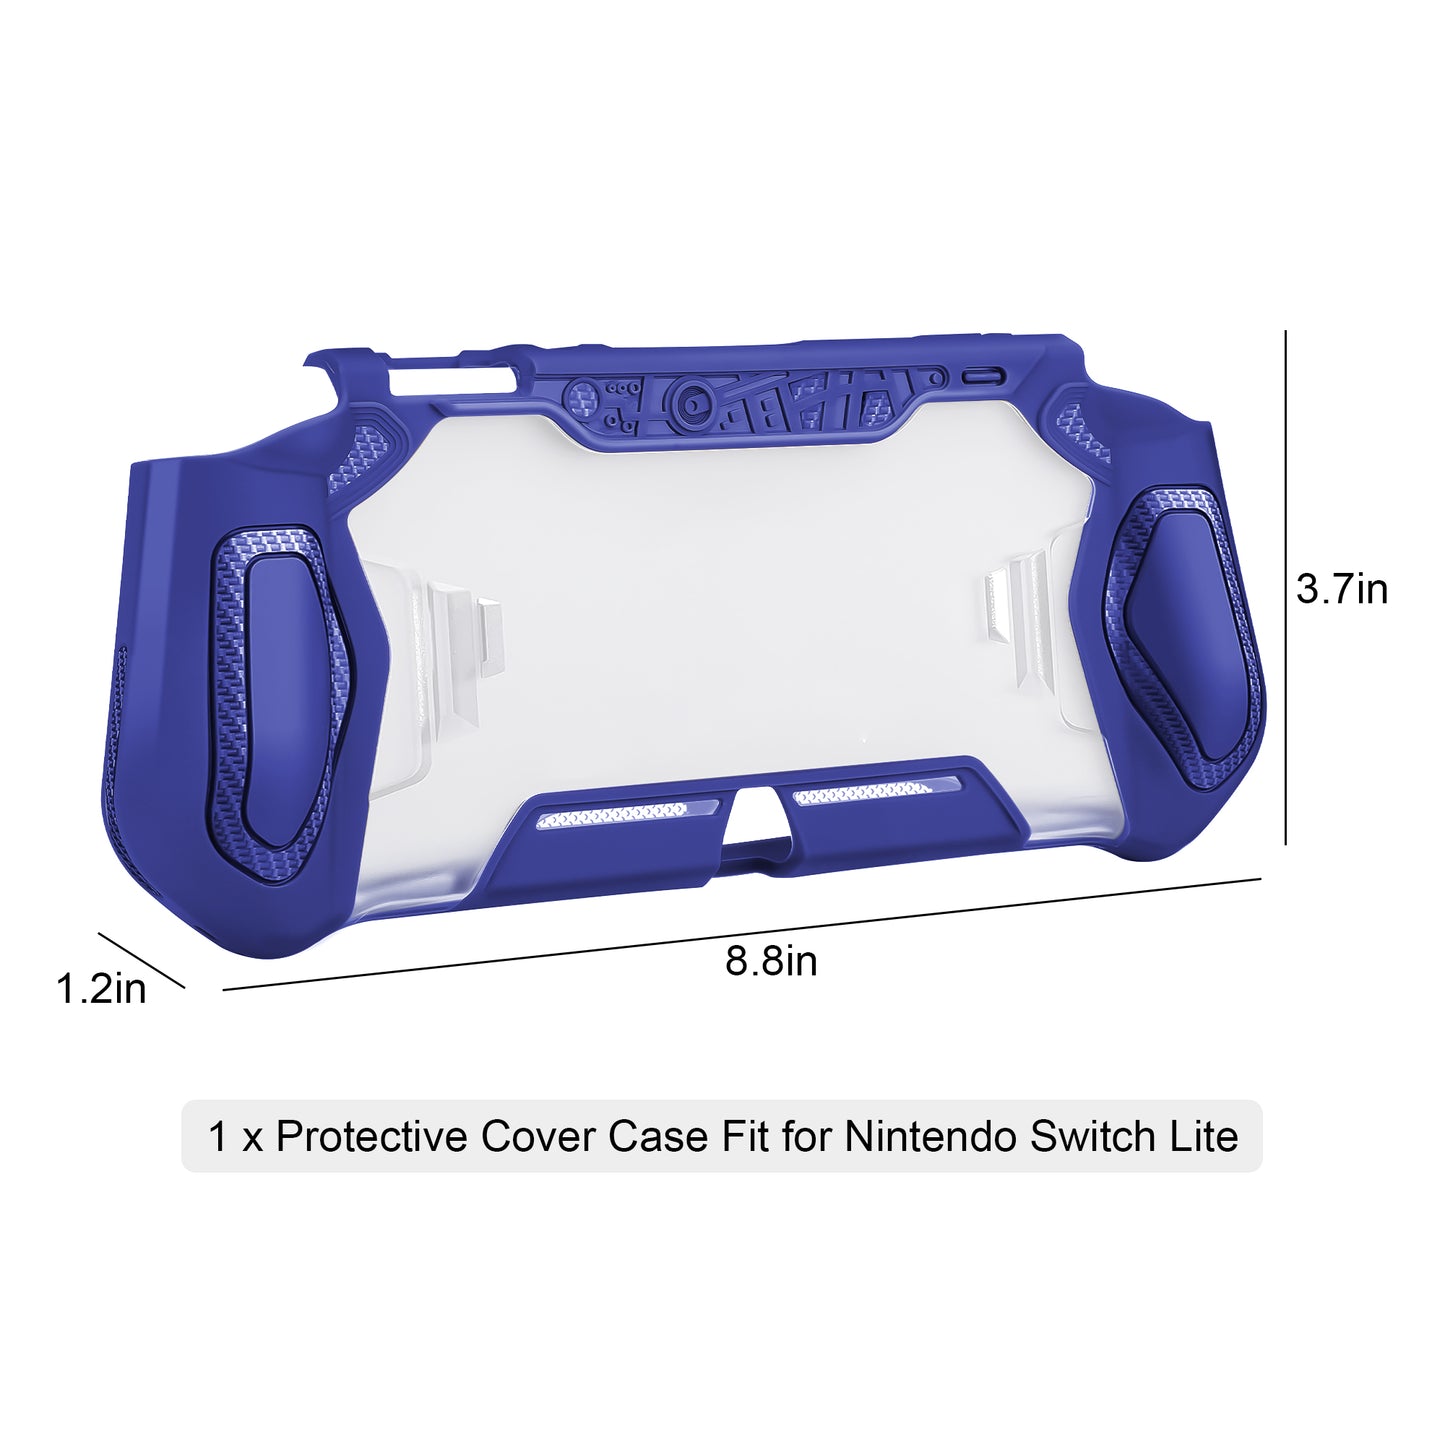 TPU Protective Cover Case Fit for Nintendo Switch Lite - Shockproof Grip Handle Hard Shell with Ergonomic Grip, Shockproof Anti-Scratch (Blue)